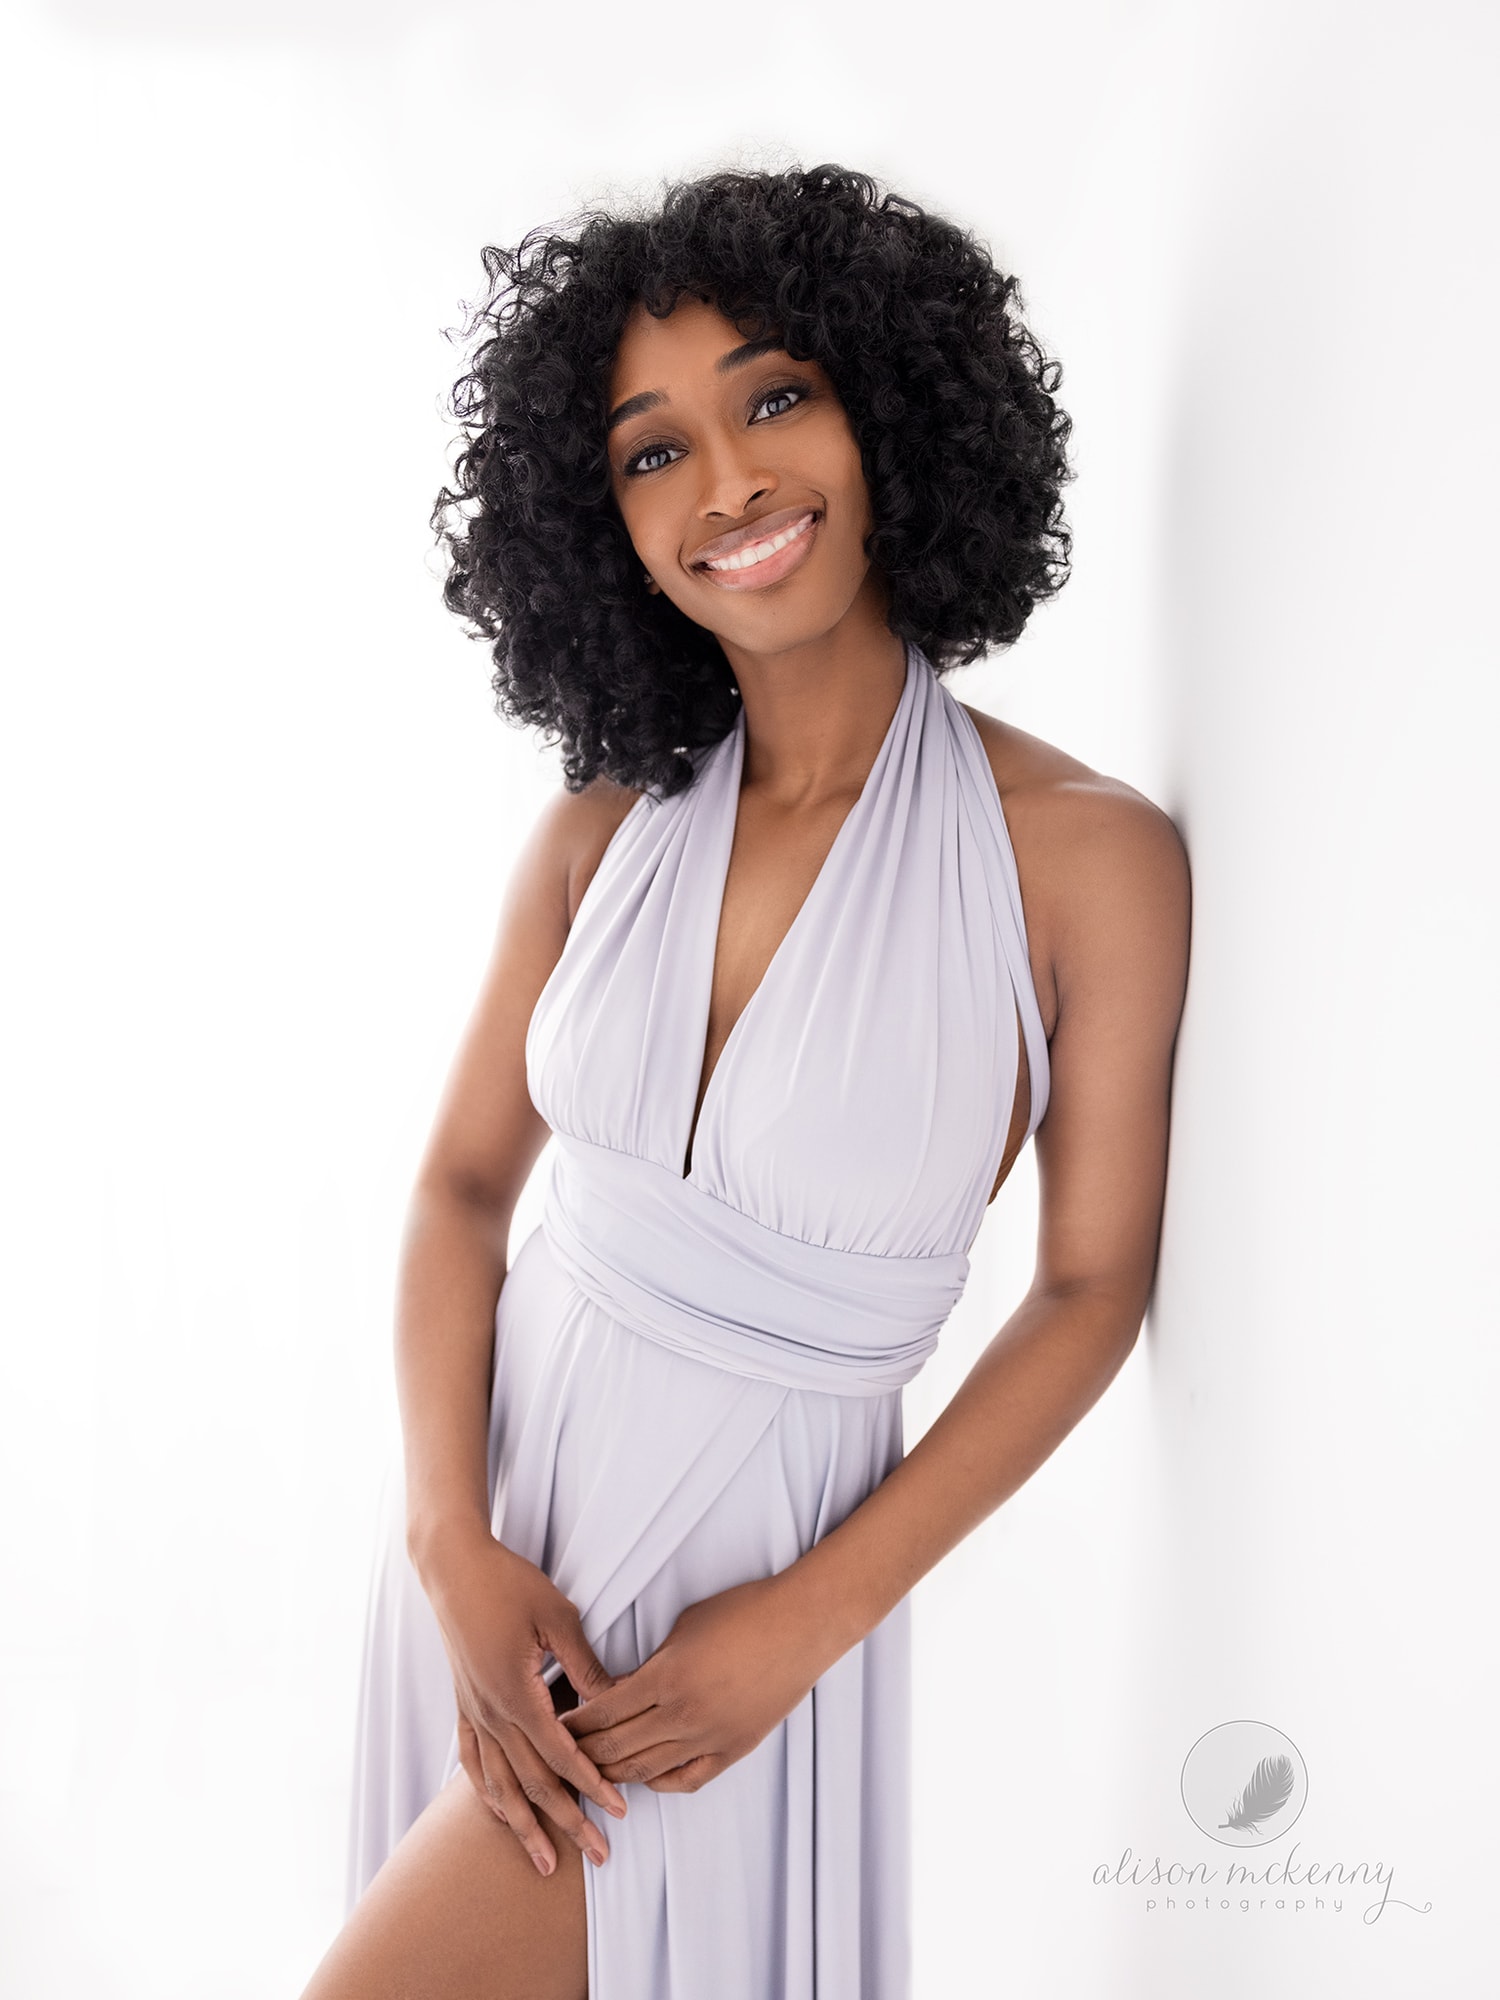 Beautiful woman in a grey dress smiles during her Beauty Shoot